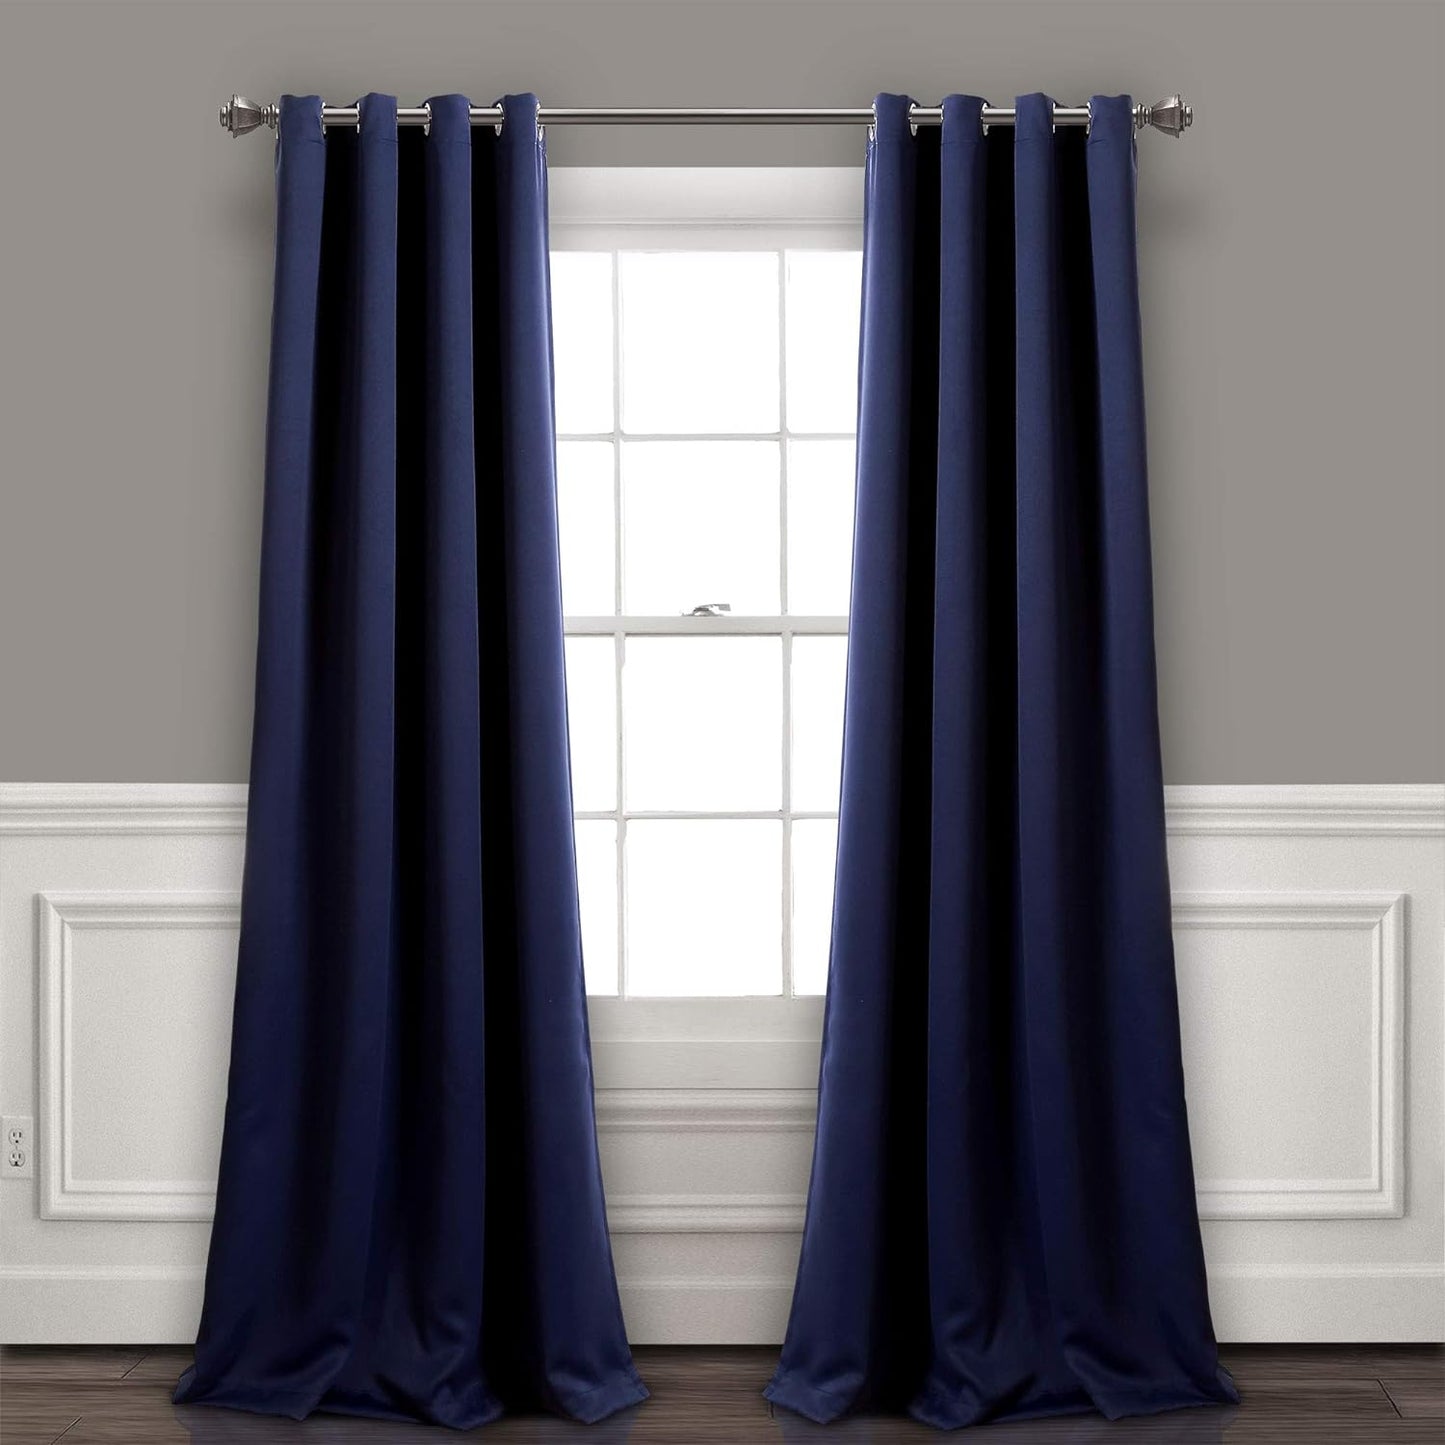 Lush Decor Insulated Grommet Blackout Window Curtain Panels, Pair, 52" W X 120" L, Wheat - Classic Modern Design - 120 Inch Curtains - Extra Long Curtains for Living Room, Bedroom, or Dining Room  Triangle Home Fashions Navy 52"W X 95"L 